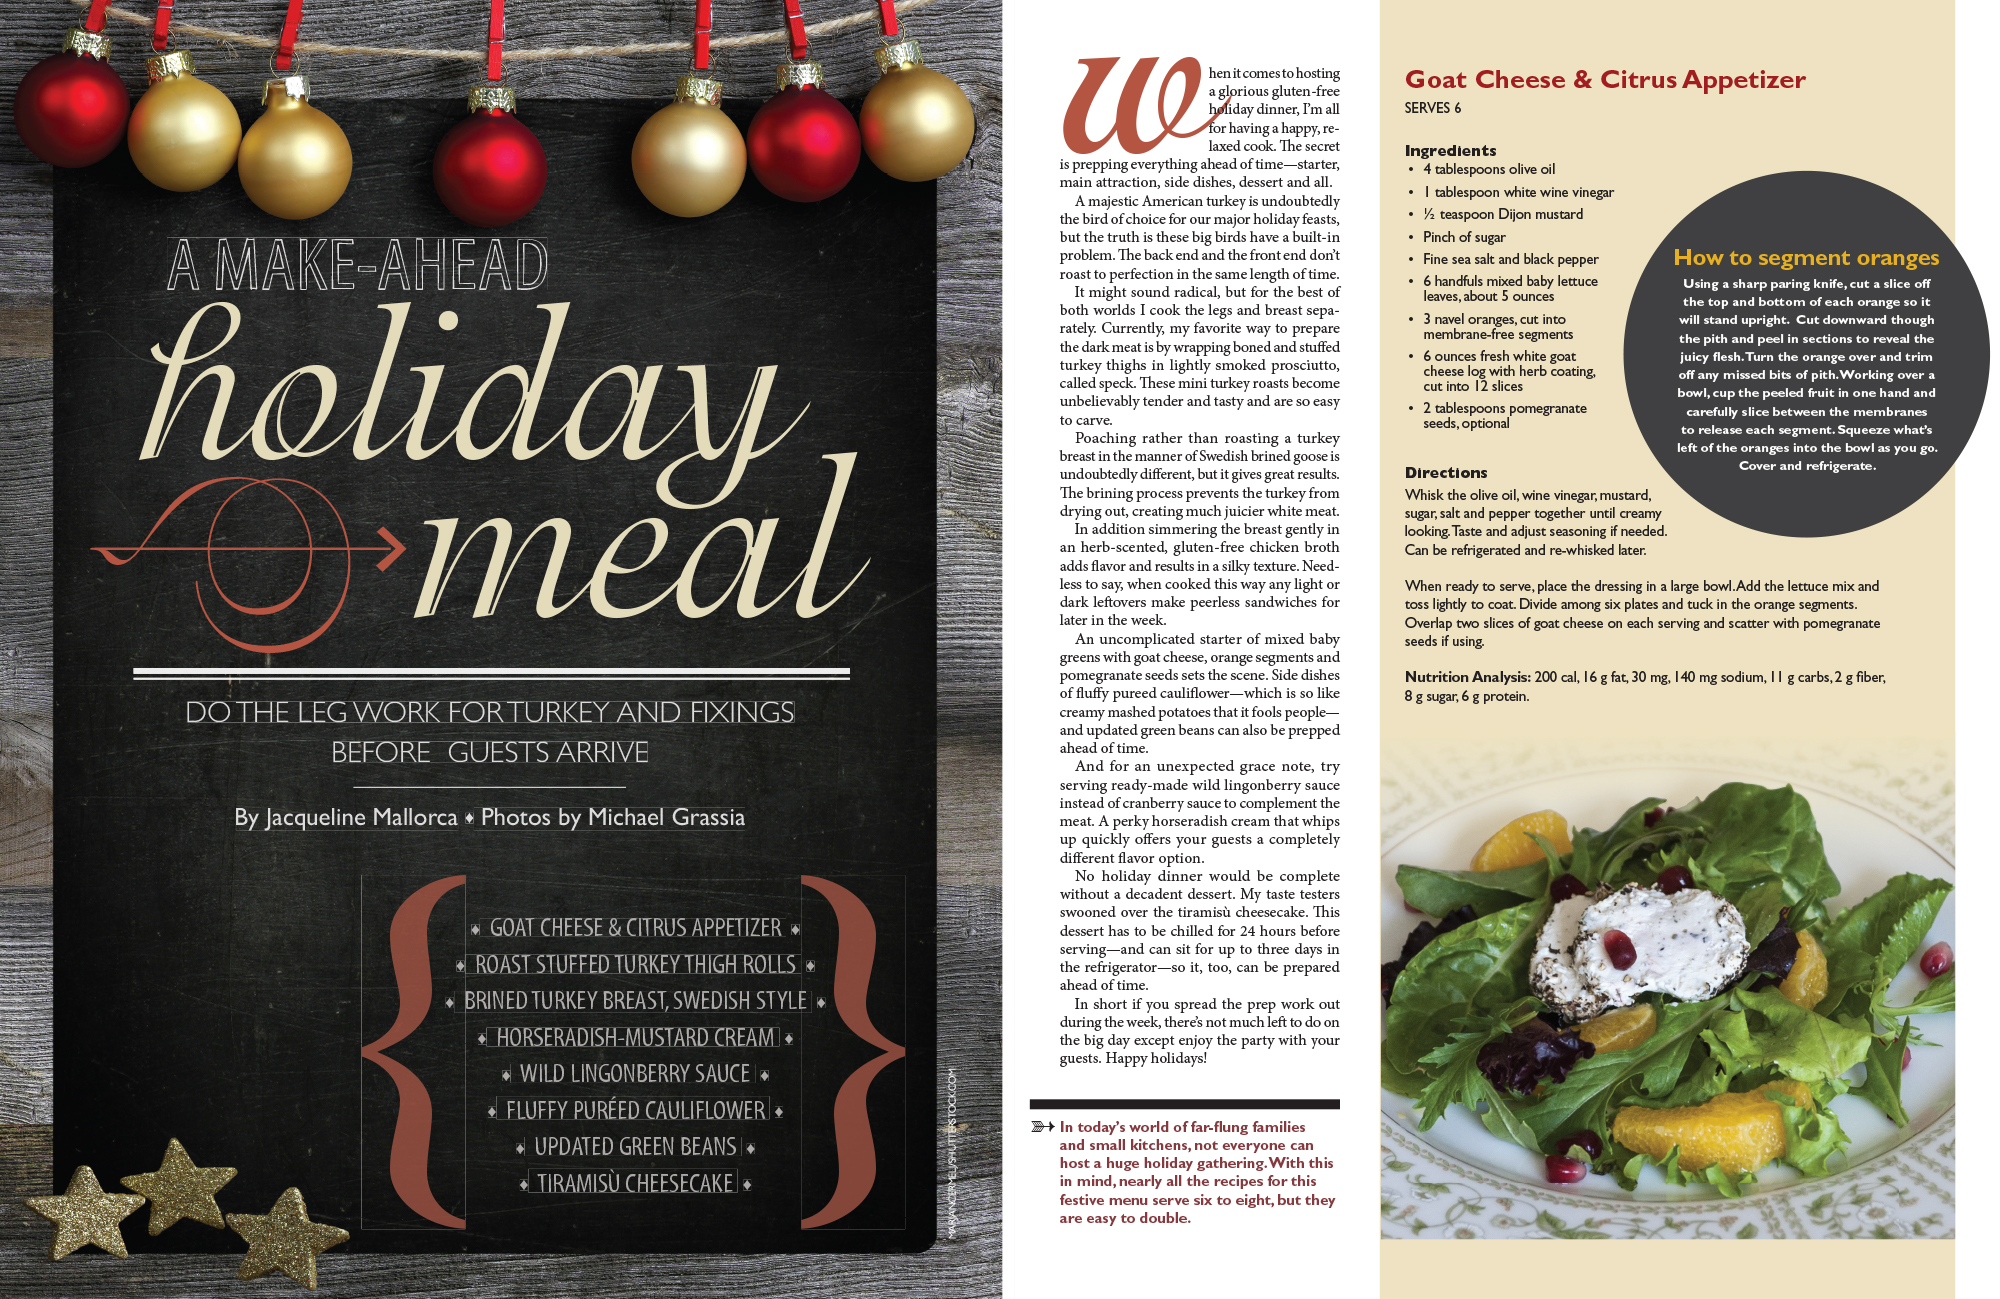 Magazine spread titled "Make-ahead holiday meal"